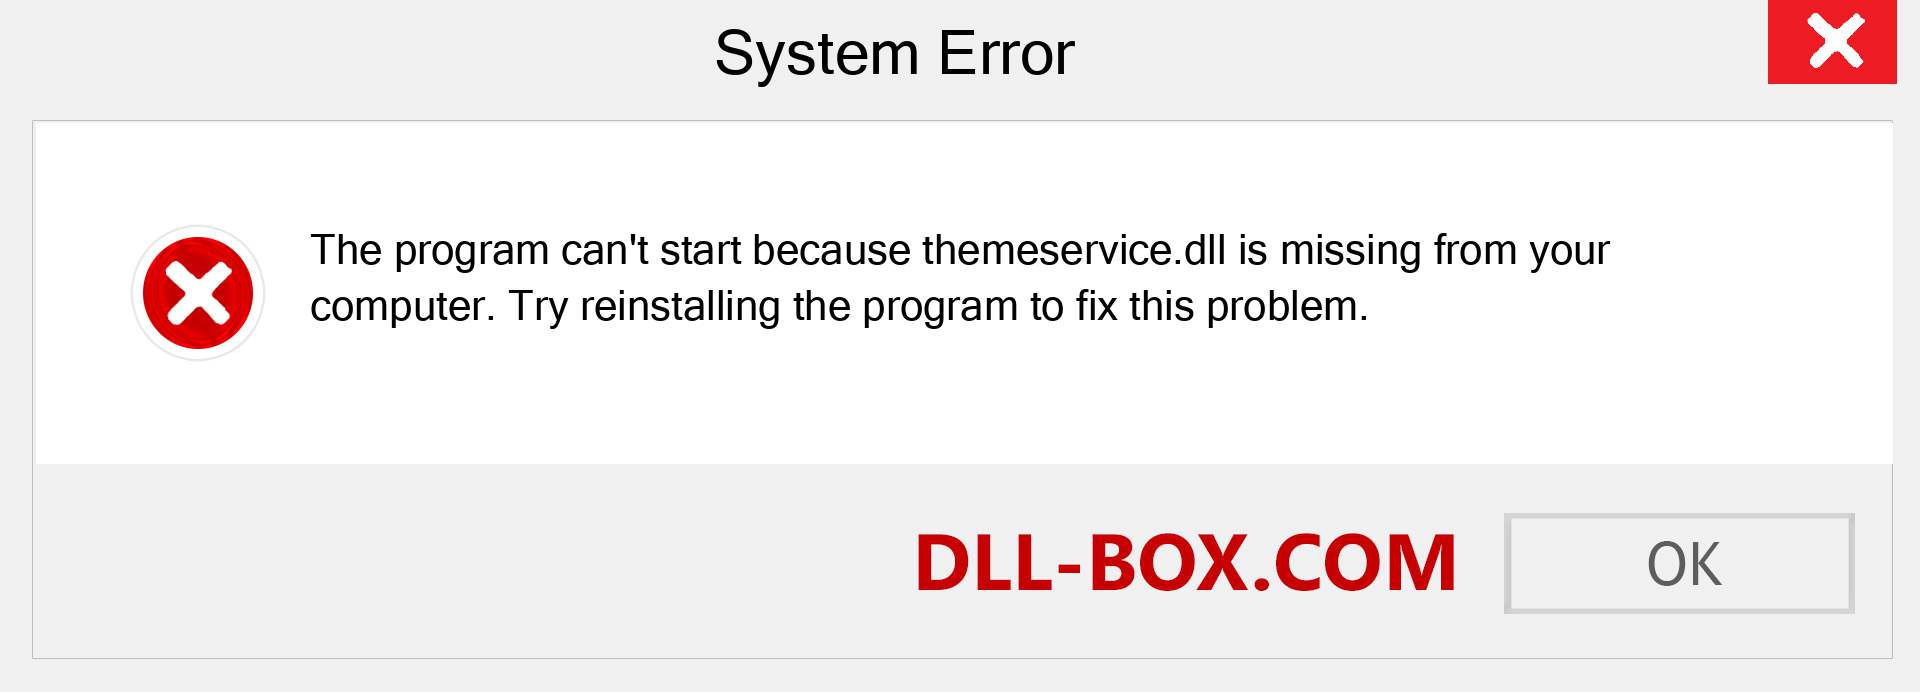  themeservice.dll file is missing?. Download for Windows 7, 8, 10 - Fix  themeservice dll Missing Error on Windows, photos, images